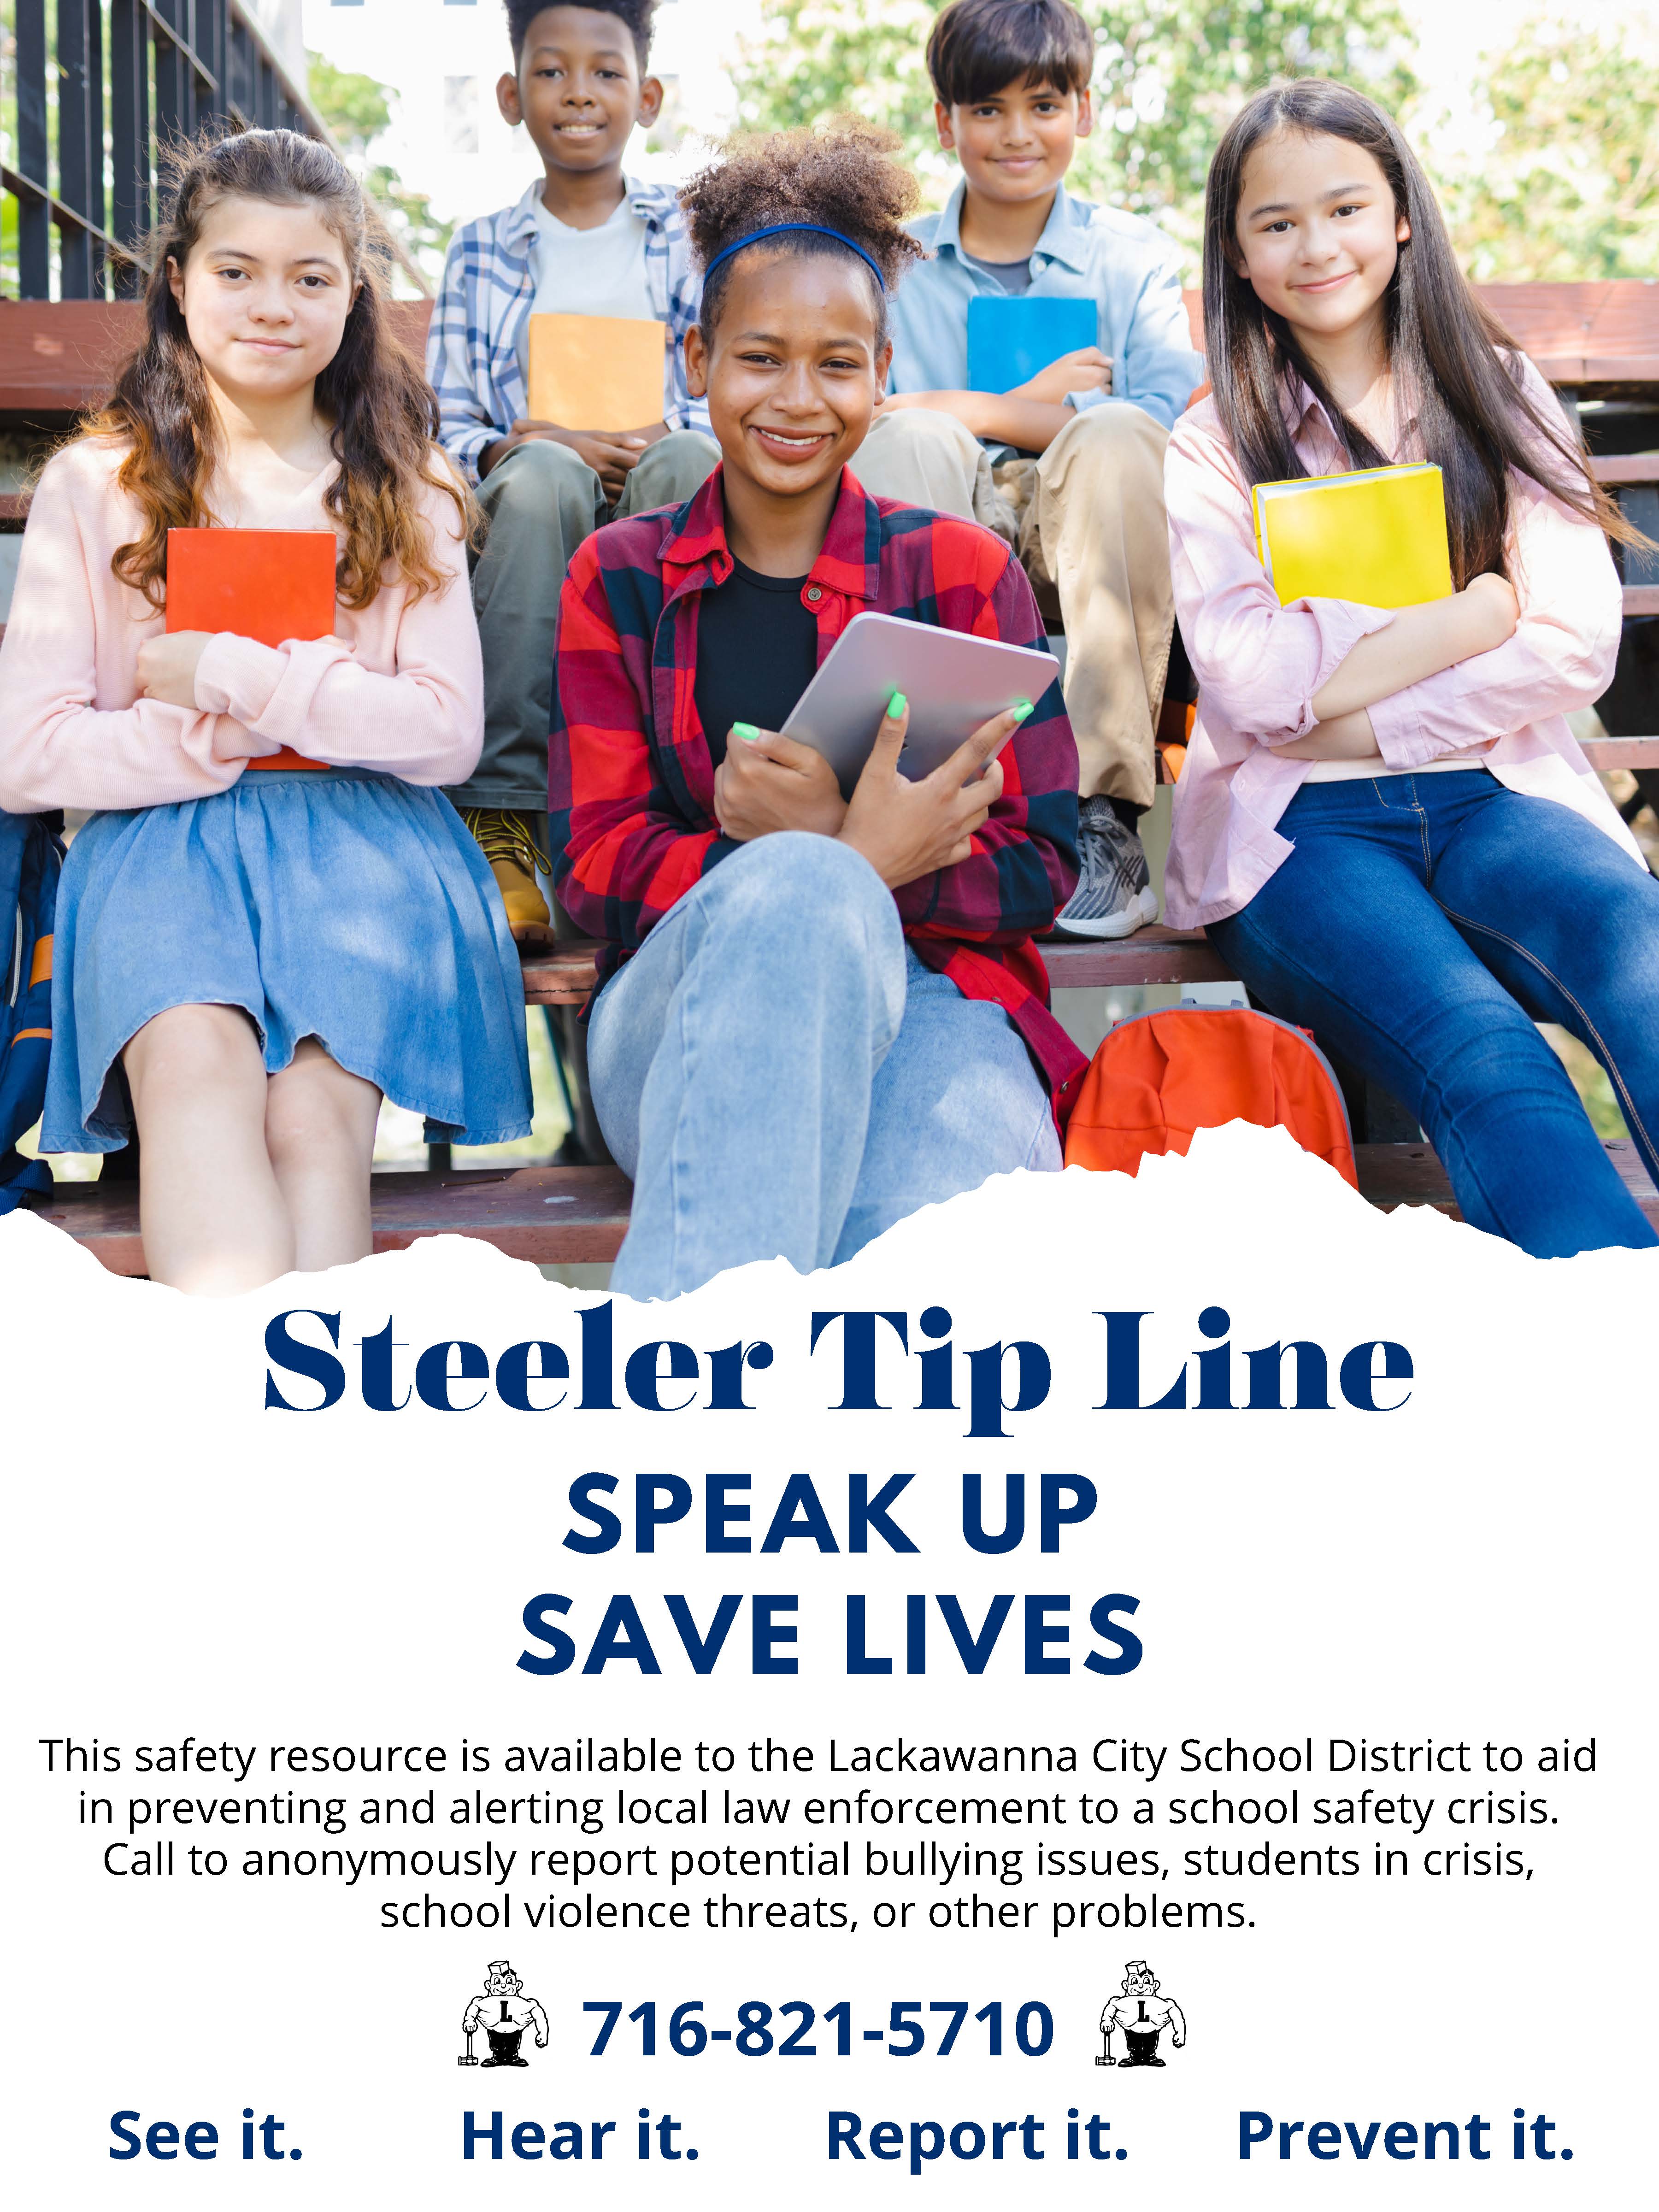 Steeler Tip Line SPEAK UP SAVE LIVES This safety resource is available to the Lackawanna City School District to aid in preventing and alerting local law enforcement to a school safety crisis. Call to anonymously report potential bullying issues, students in crisis, school violence threats, or other problems. 716-821-5710